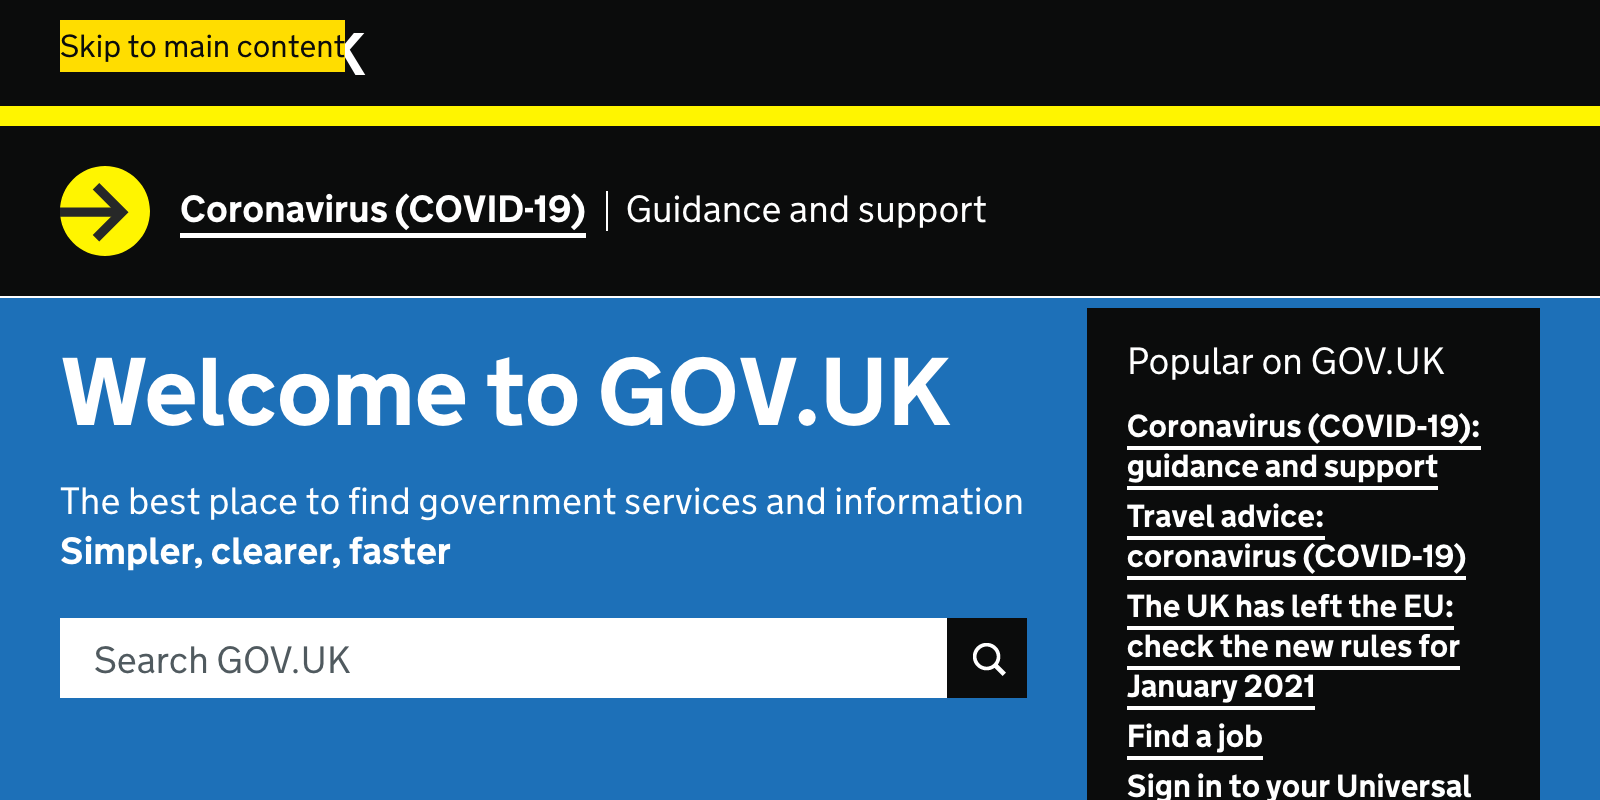 An example of a skip link, with the text 'Skip to main content' in the header of the GOV.UK homepage.